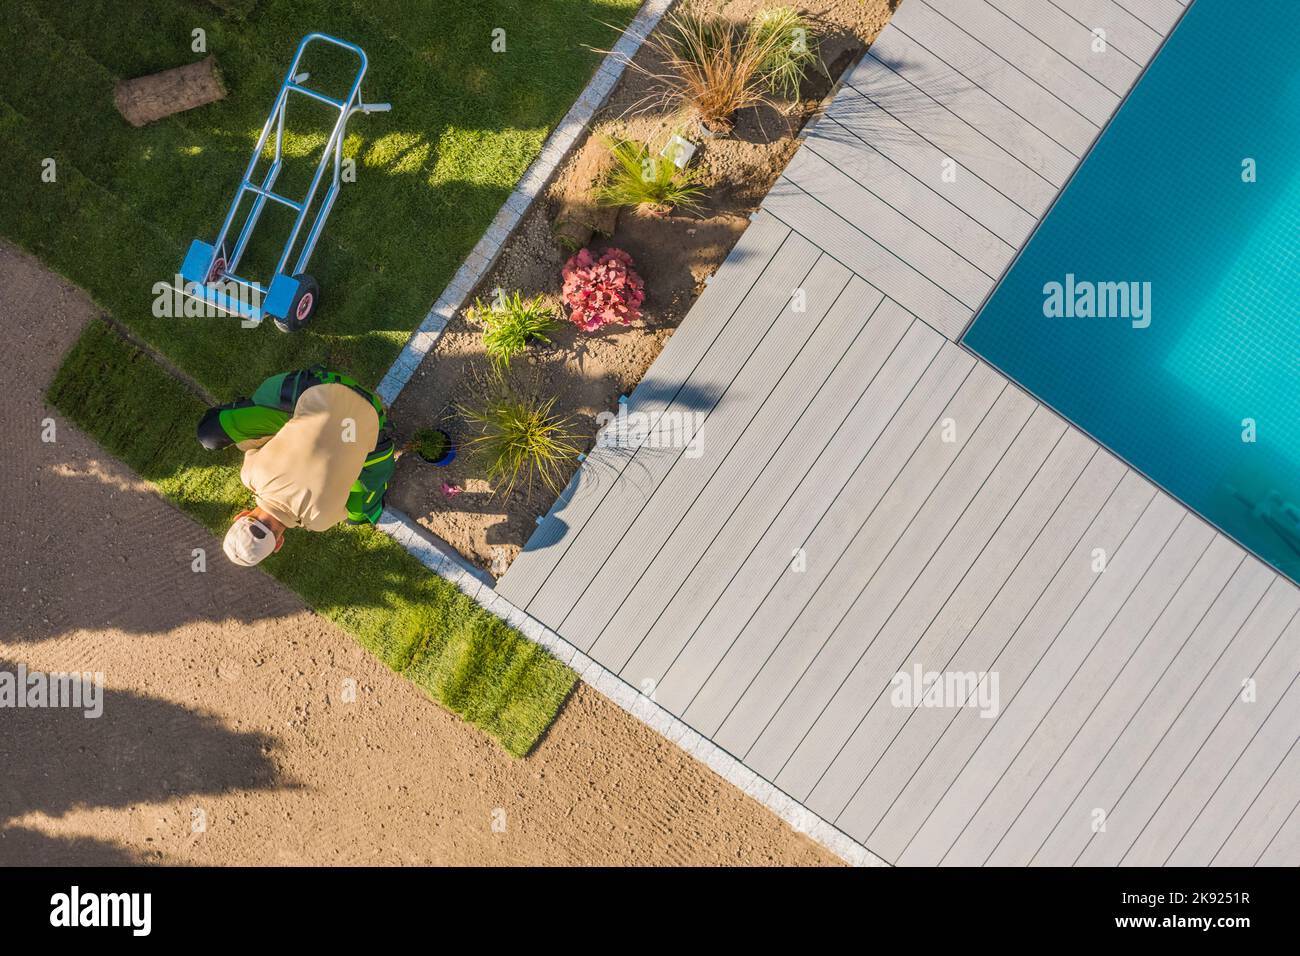 Professional Landscaper Installing Roll Out Lawn Around Outdoor Swimming Pool. Residential Backyard Garden Landscaping Work in Progress. Aerial View Stock Photo